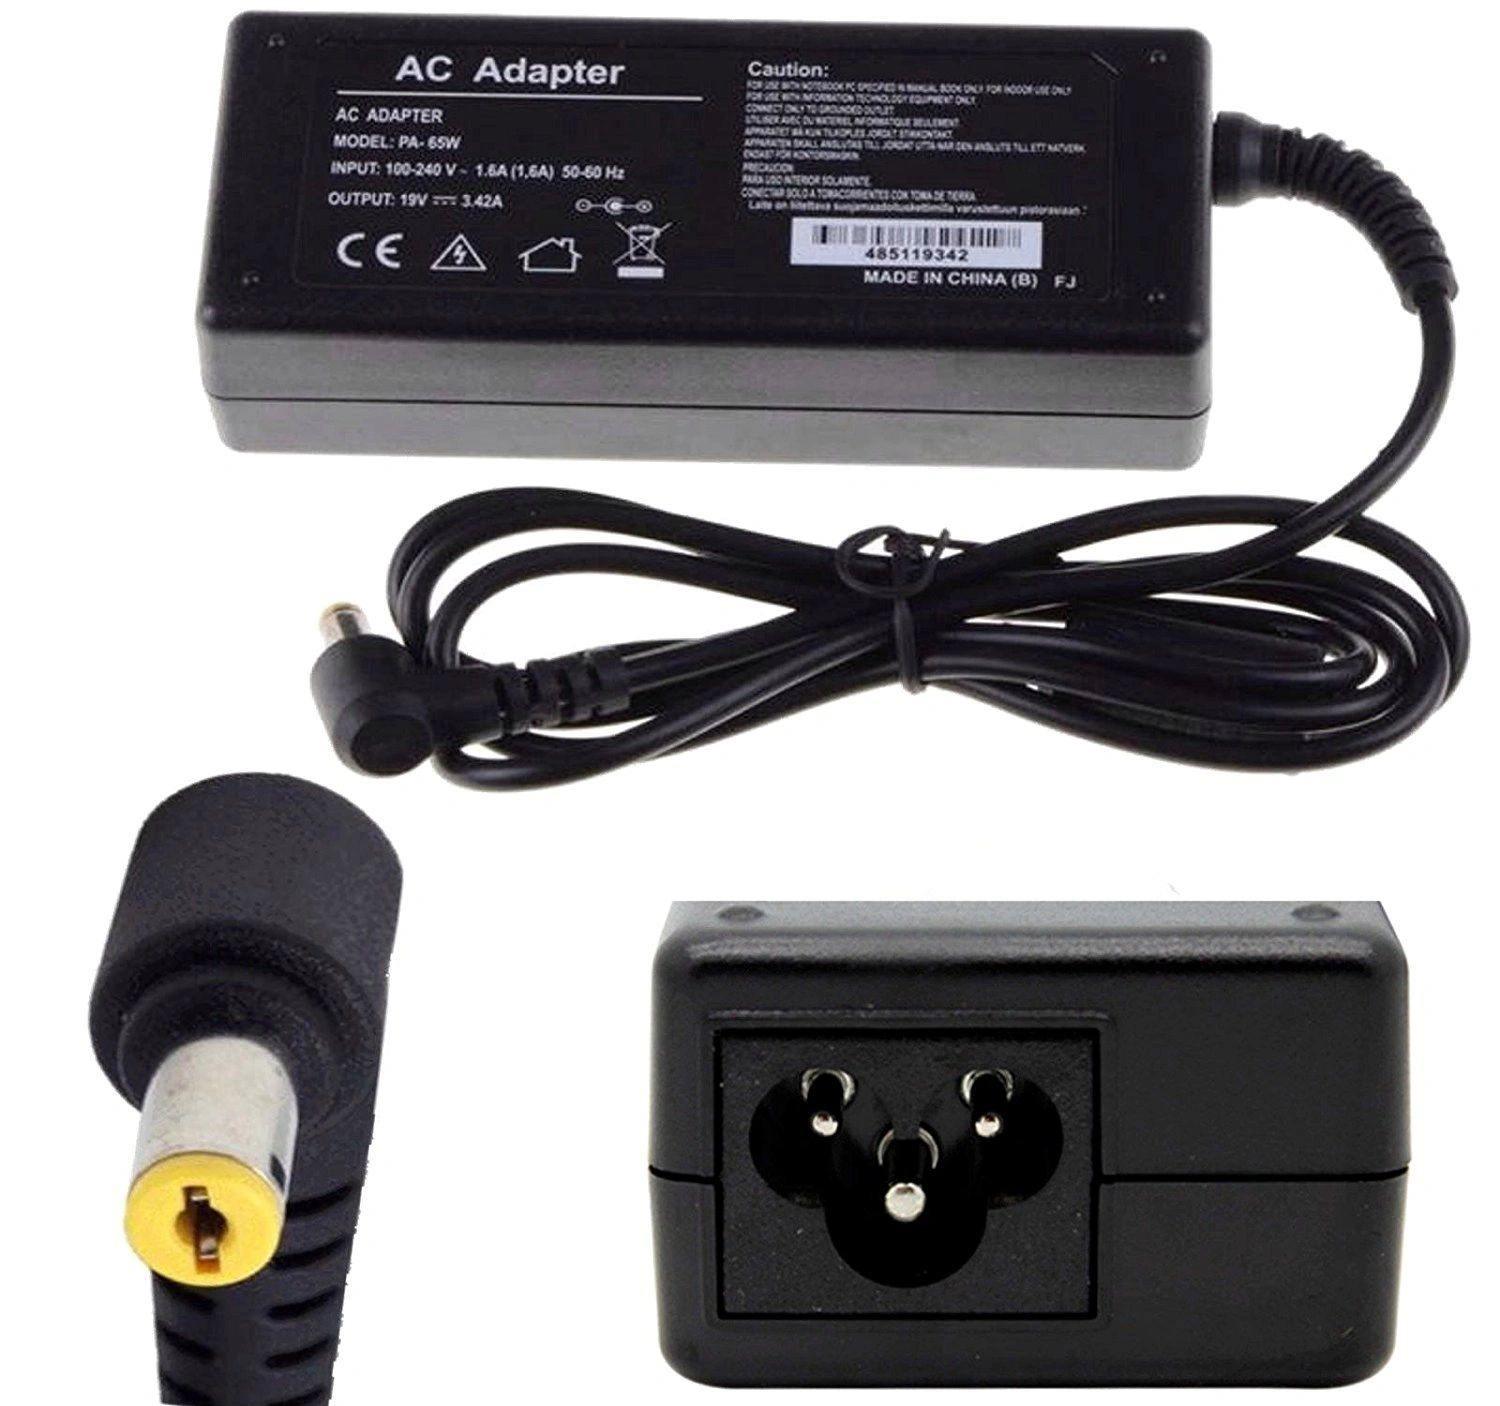 Dealsplant 65W 19V/3.42A Laptop AC Adapter for ACER Aspire Travelmate 4736 5738 5742 E1-53,1571 Series-Laptop Power Adapters-dealsplant